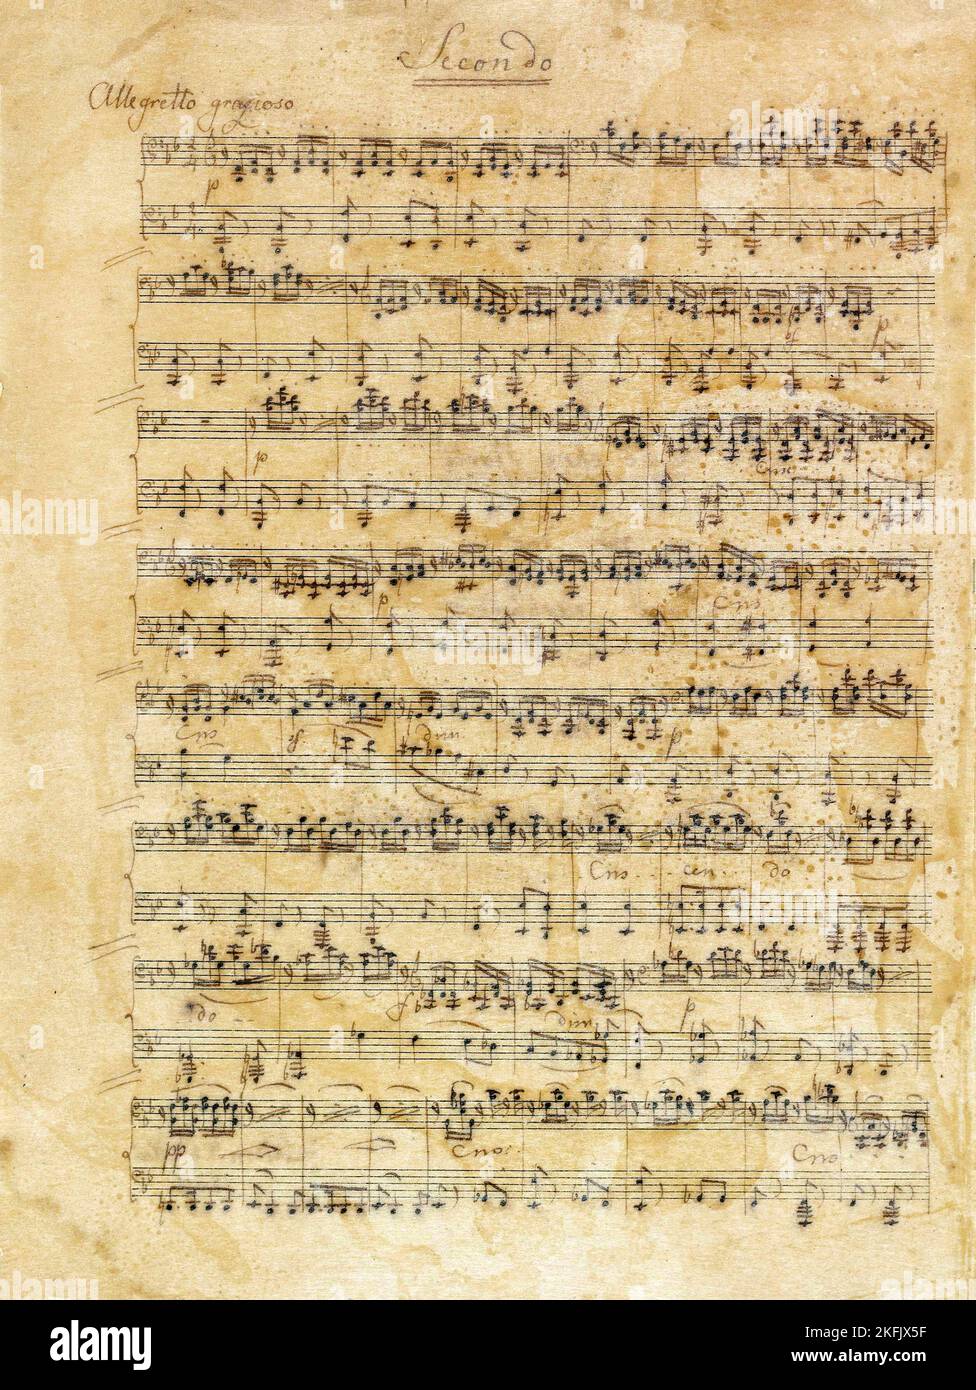 Felix Mendelssohn-Bartholdy; Song without Words for Piano Four Hands; 1847; Music manuscript; Royal Collection of the United Kingdom. Stock Photo